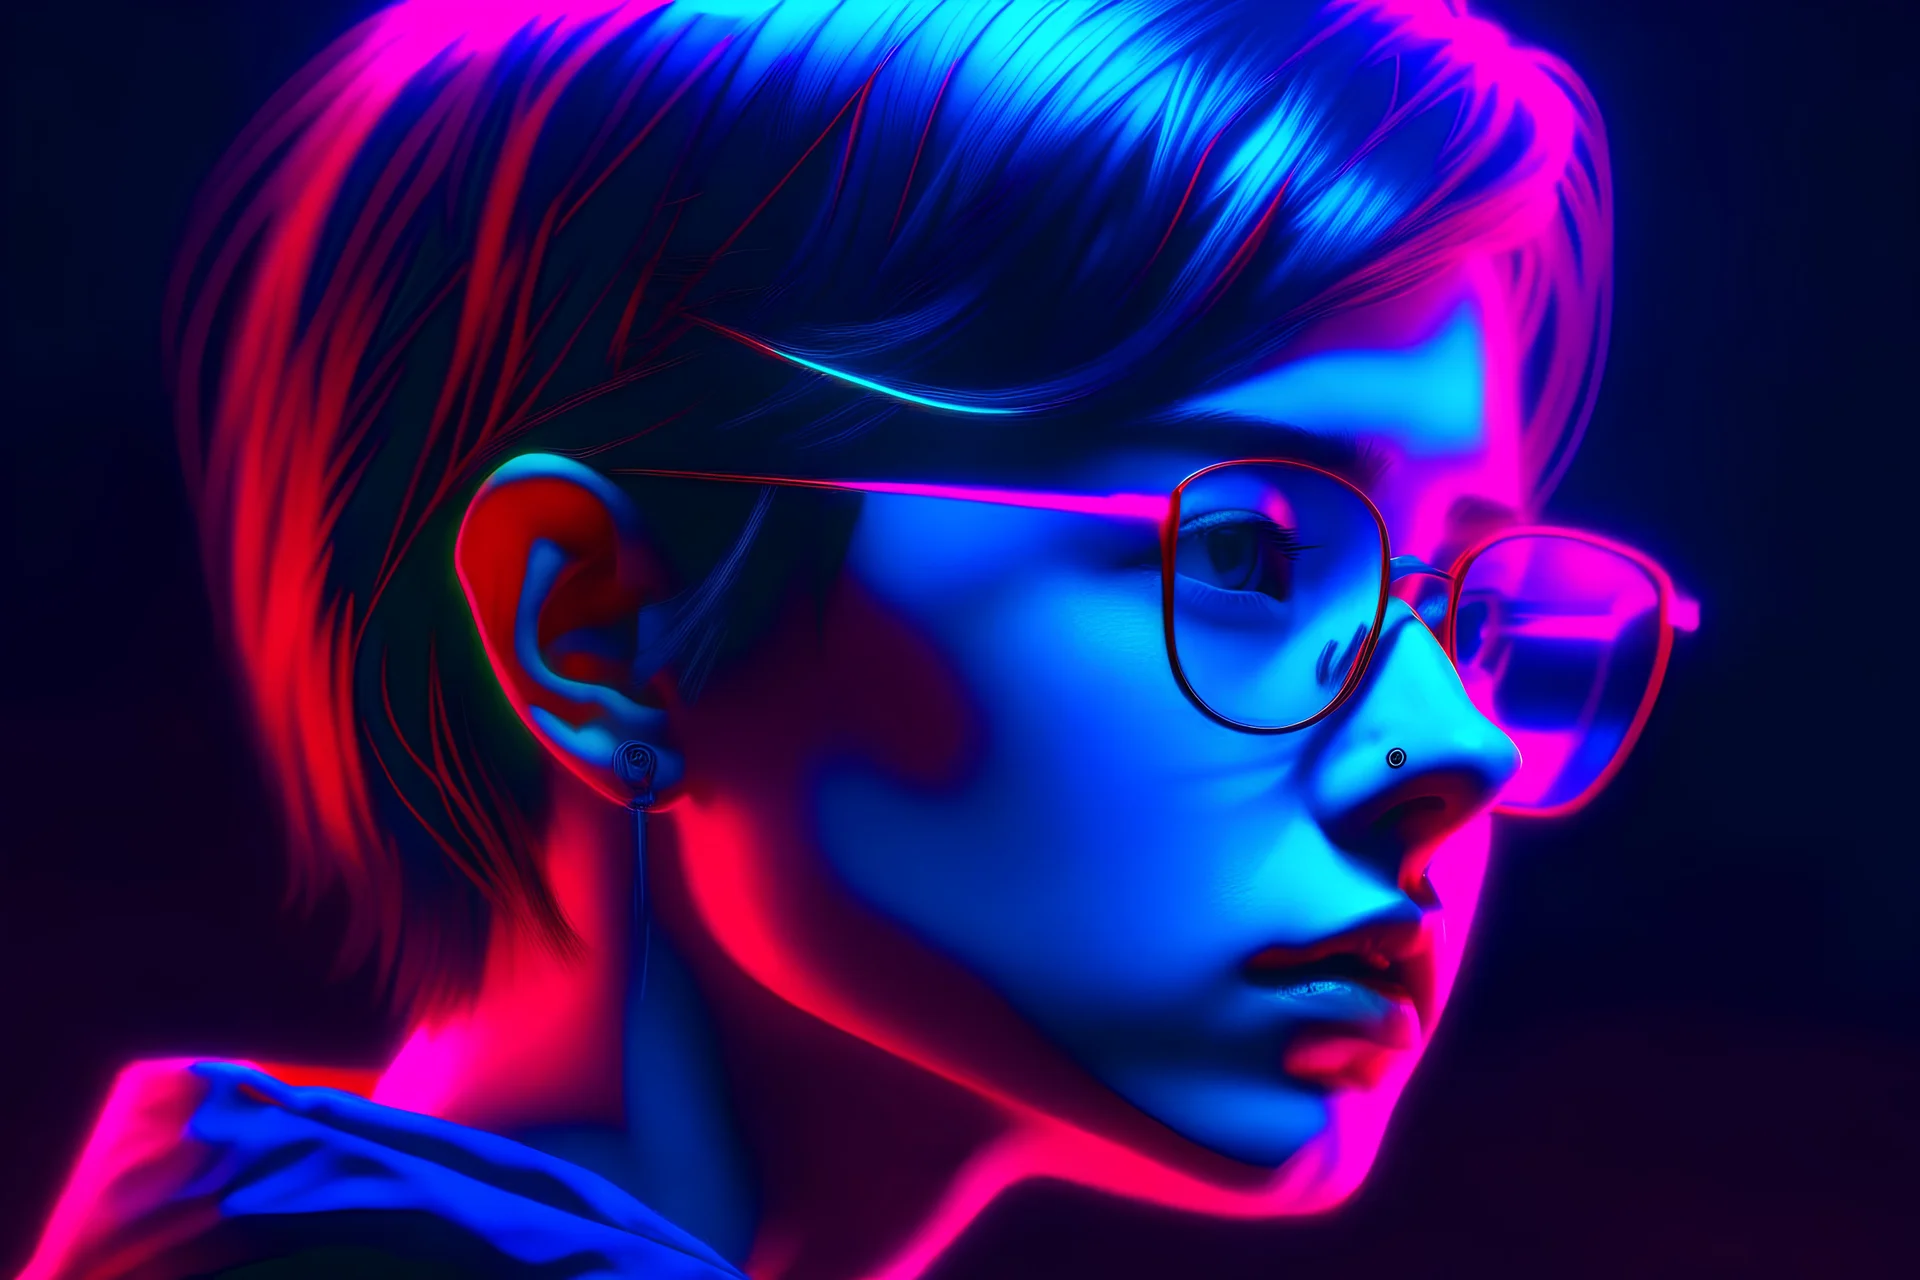 A stunning close-up portrait of a young woman in a synthwave-inspired style. Her side view showcases her detailed features and short, styled hair. She wears transparent heart-shaped gradient tinted glasses, and her intense gaze is directed straight at the viewer. The image features a cloned effect, with a glitch effect creating a vibrant, colorful neon palette. The overall aesthetic is edgy and fashionable, reminiscent of a cinematic poster. This captivating artwork is signed by the artist, Supe